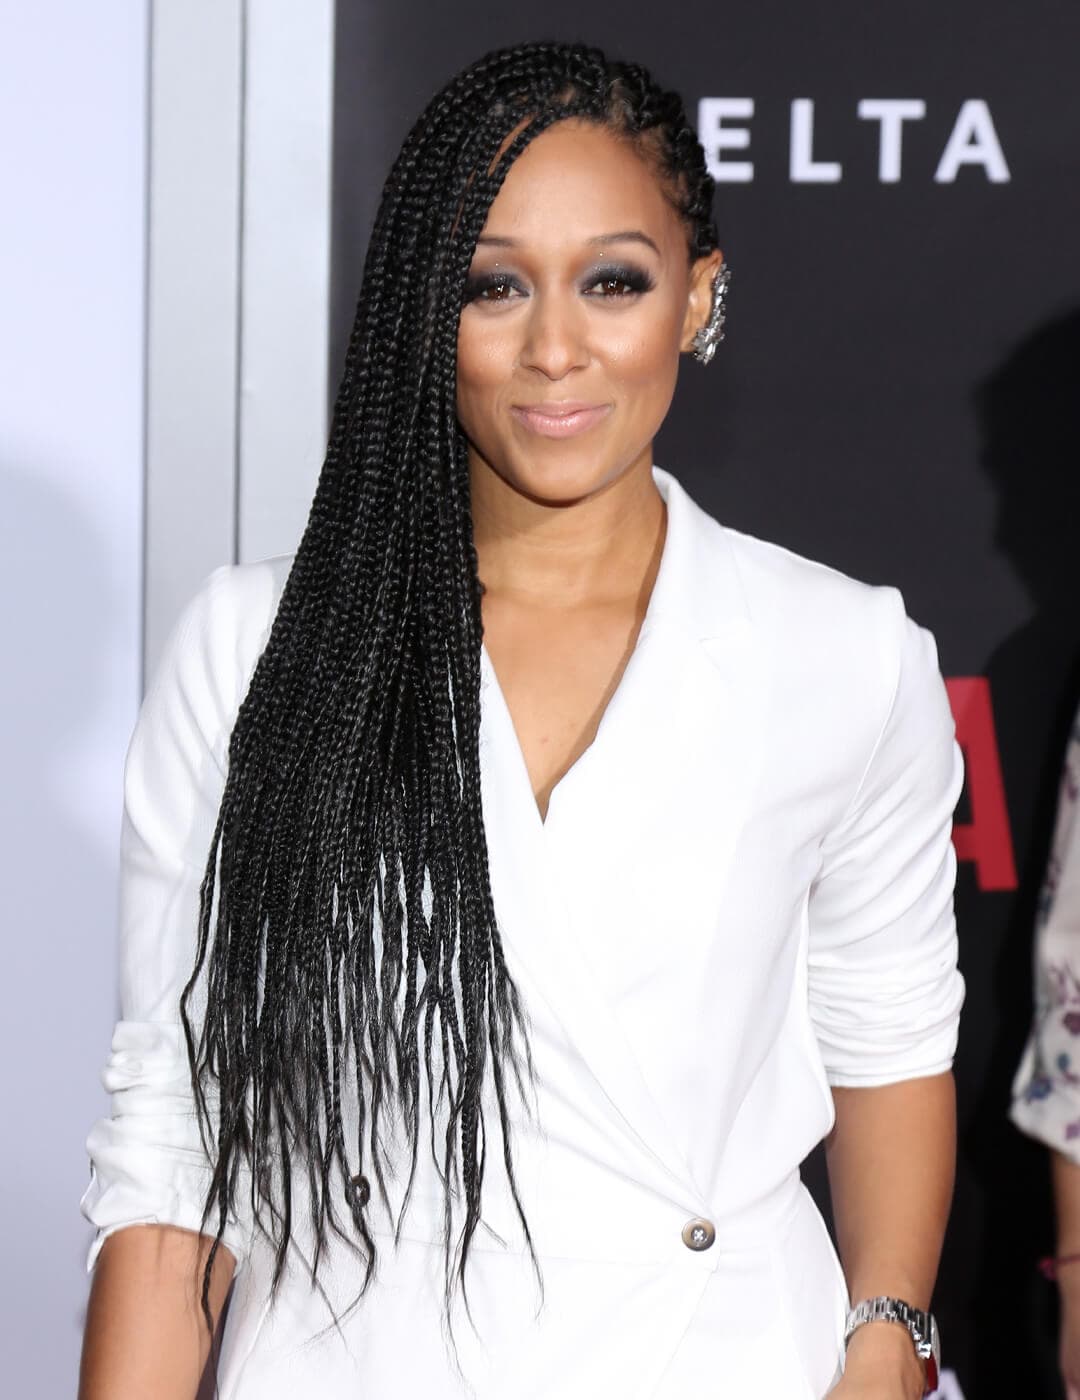 Tia Mowry looking chic in a white ensemble and side-swept braided hairstyle